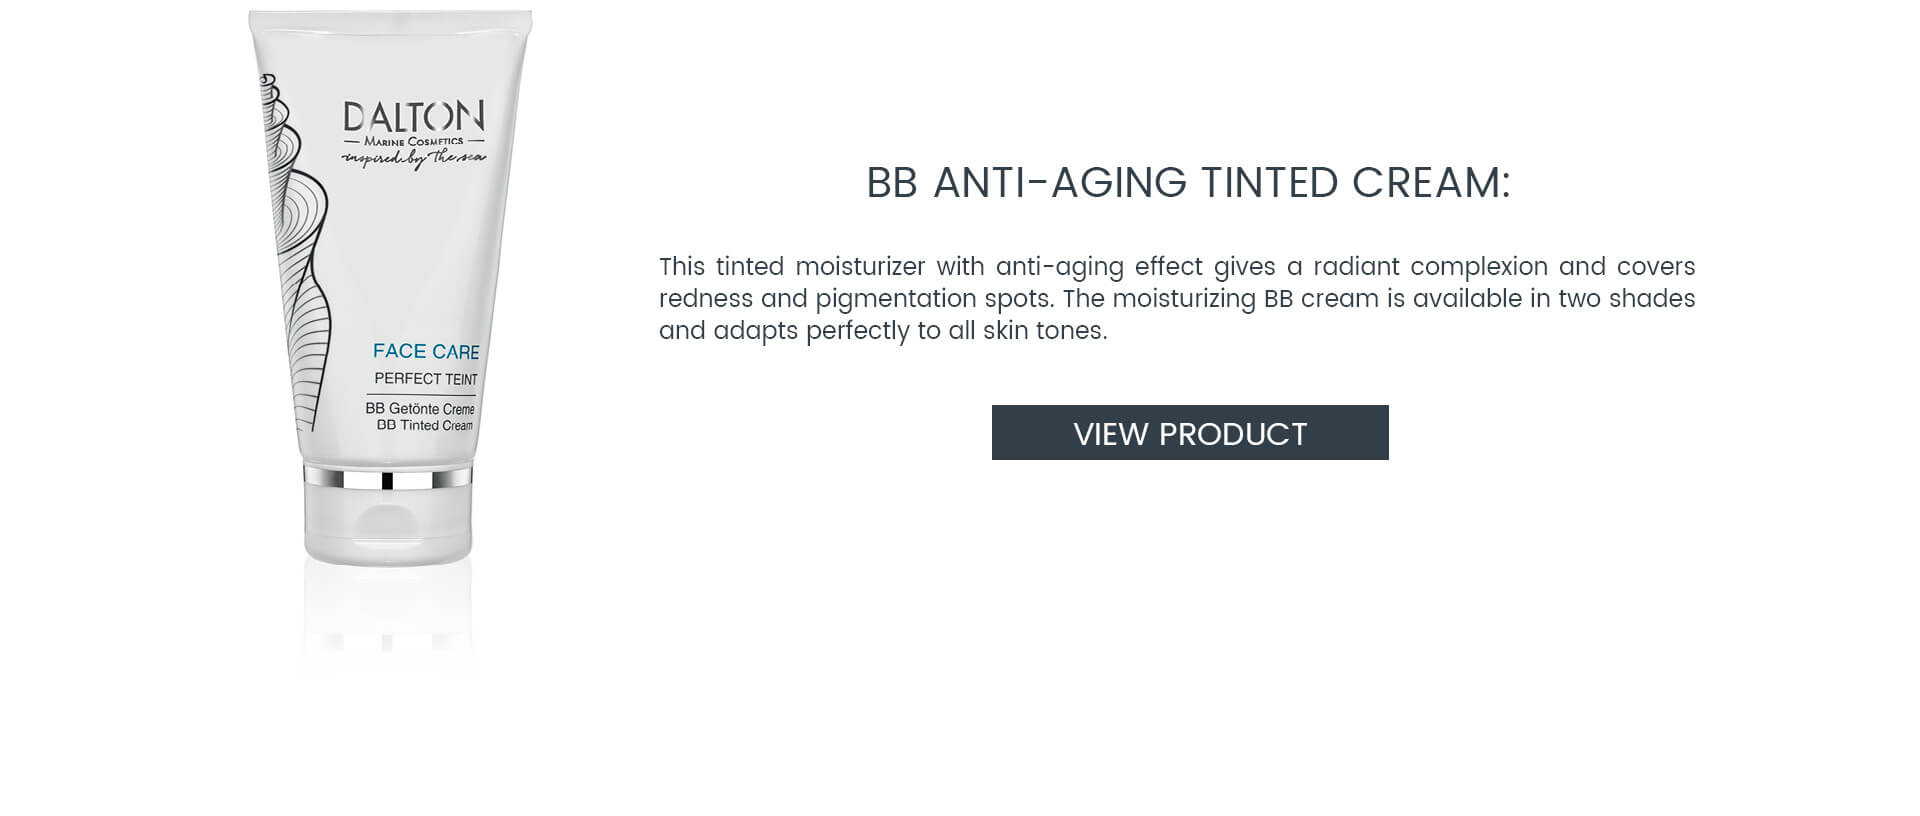 Tinted day cream with anti-aging effect